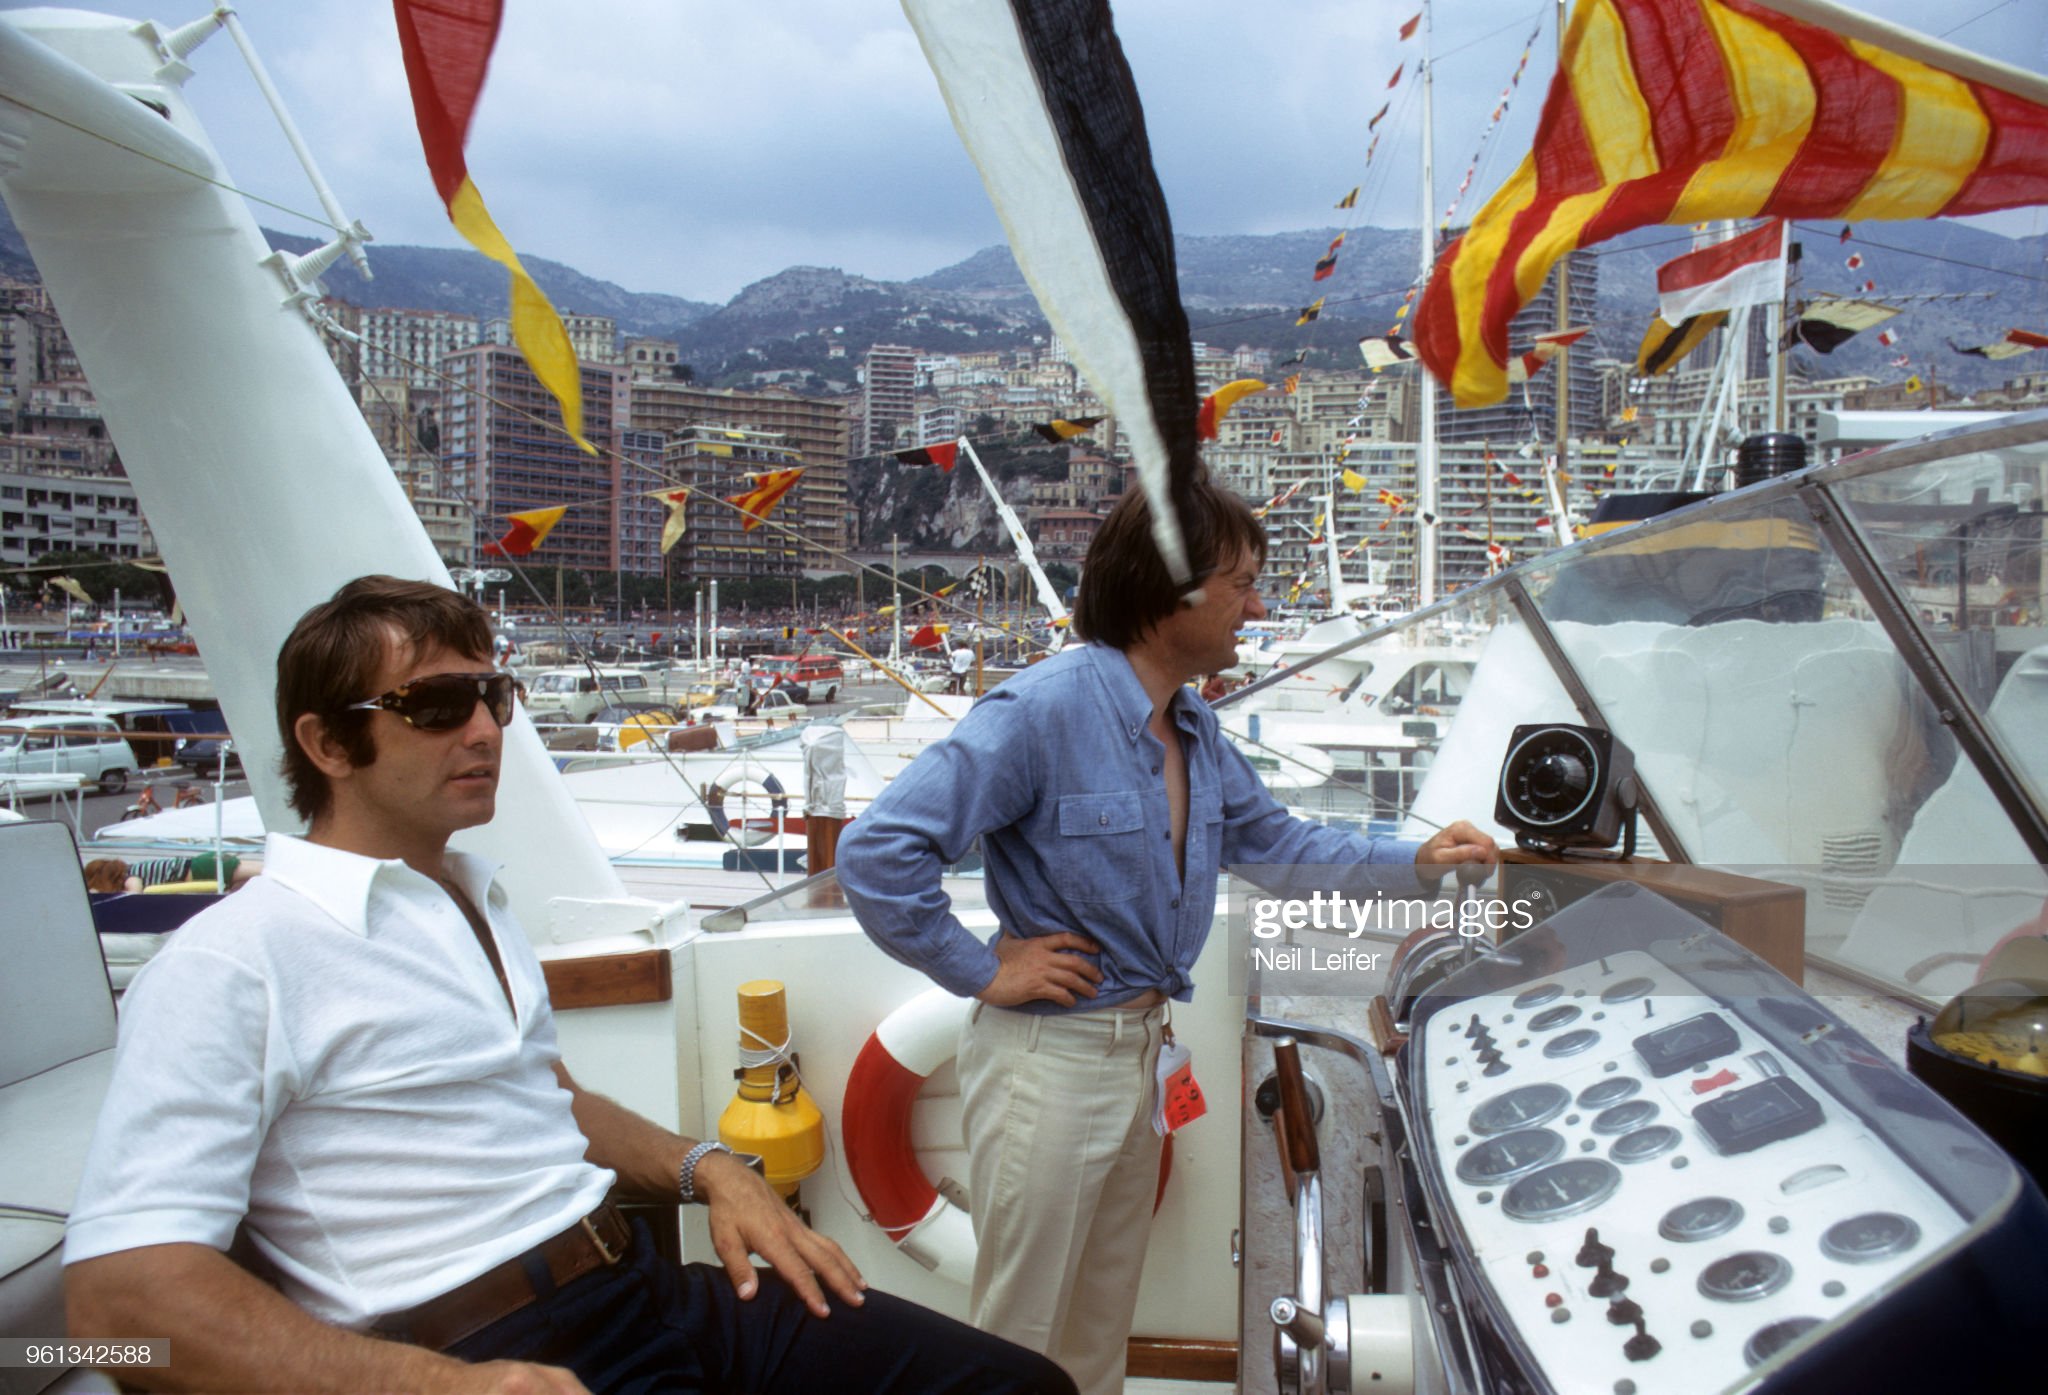 Peter Revson on a boat in the harbor at Circuit de Monaco.